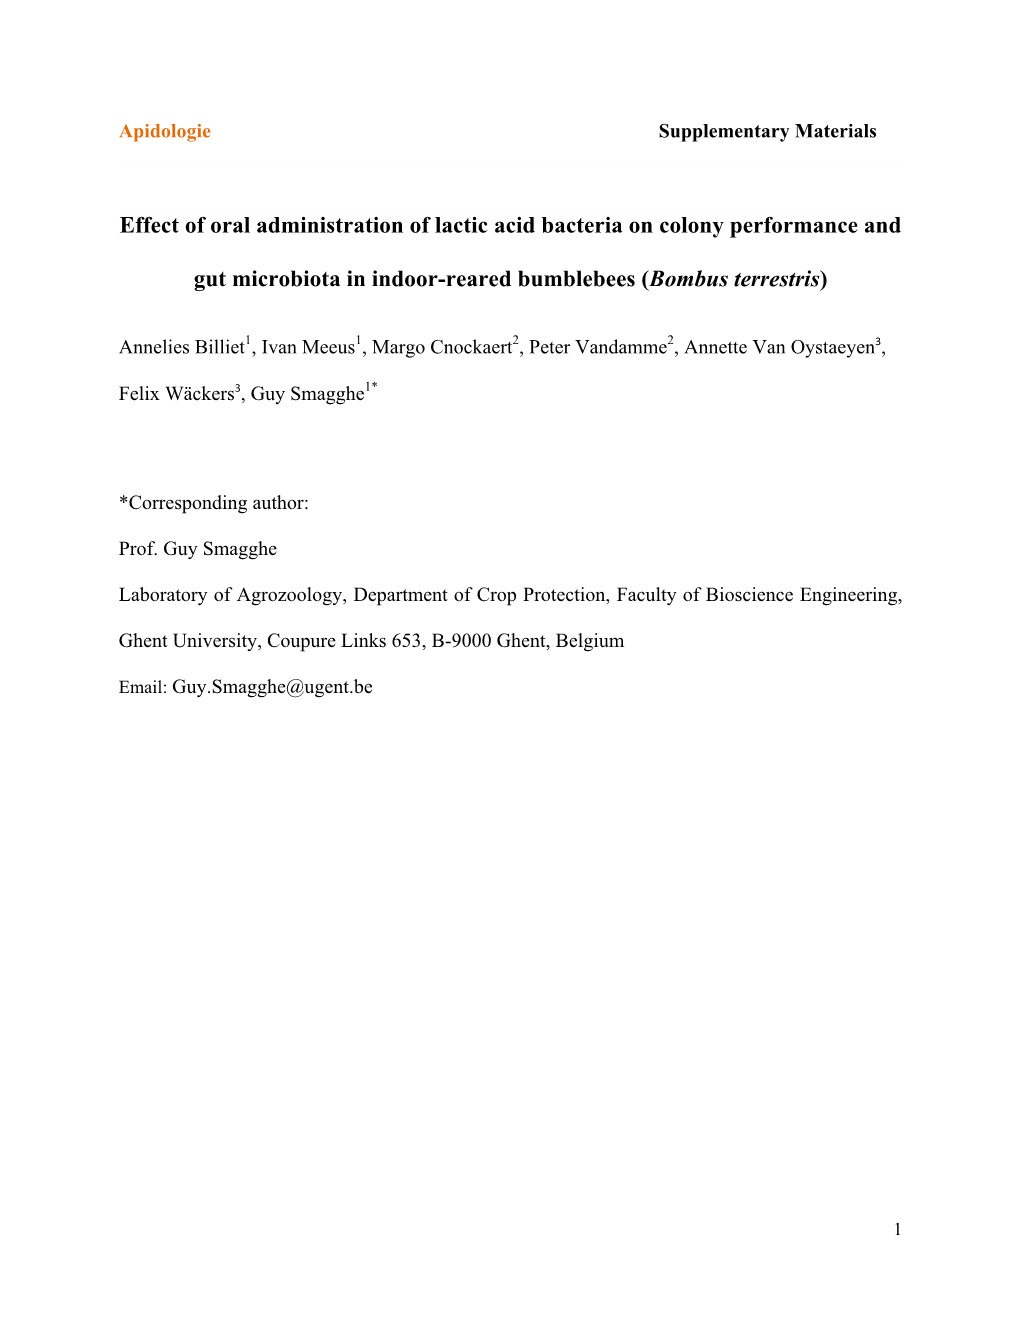 Effect of Oral Administration of Lactic Acid Bacteria on Colony Performance And